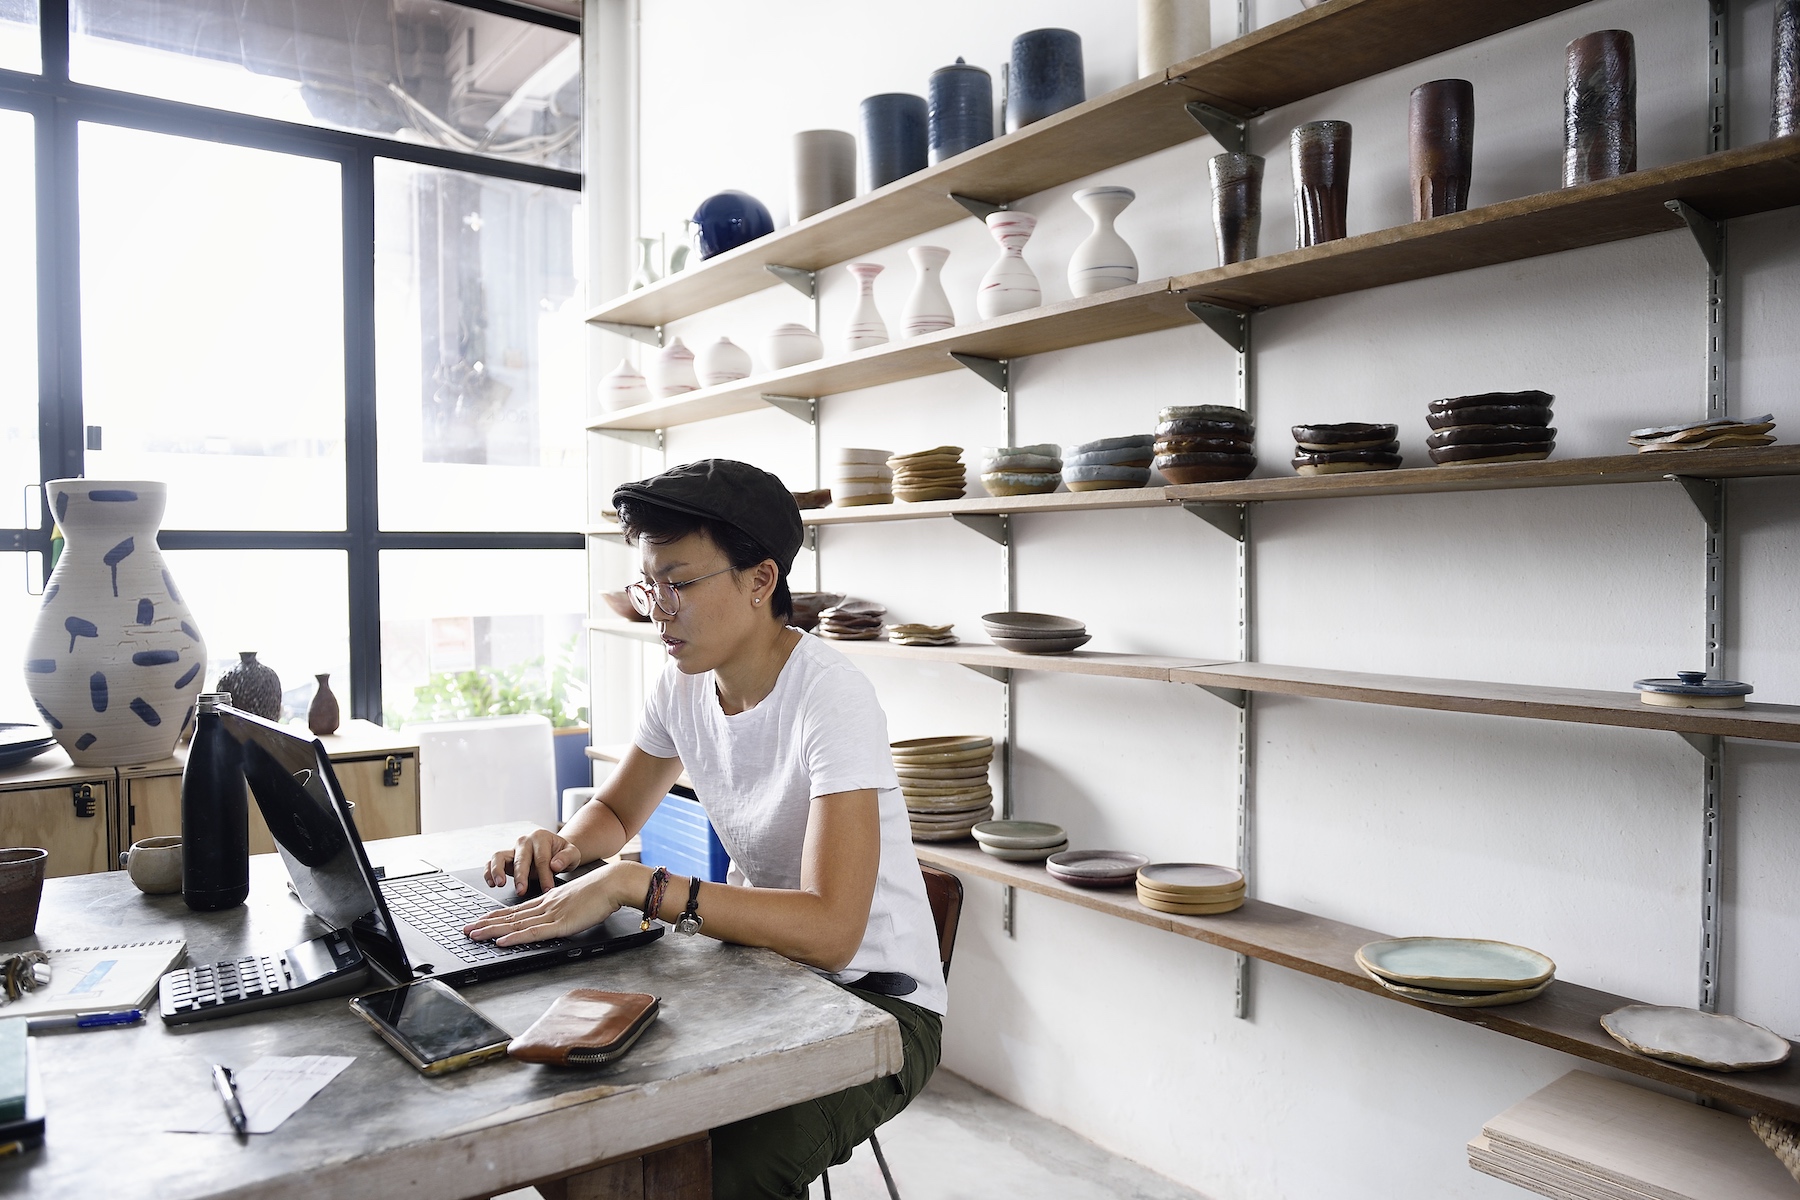 An artist works at their laptop on a desk in the middle of their pottery shop